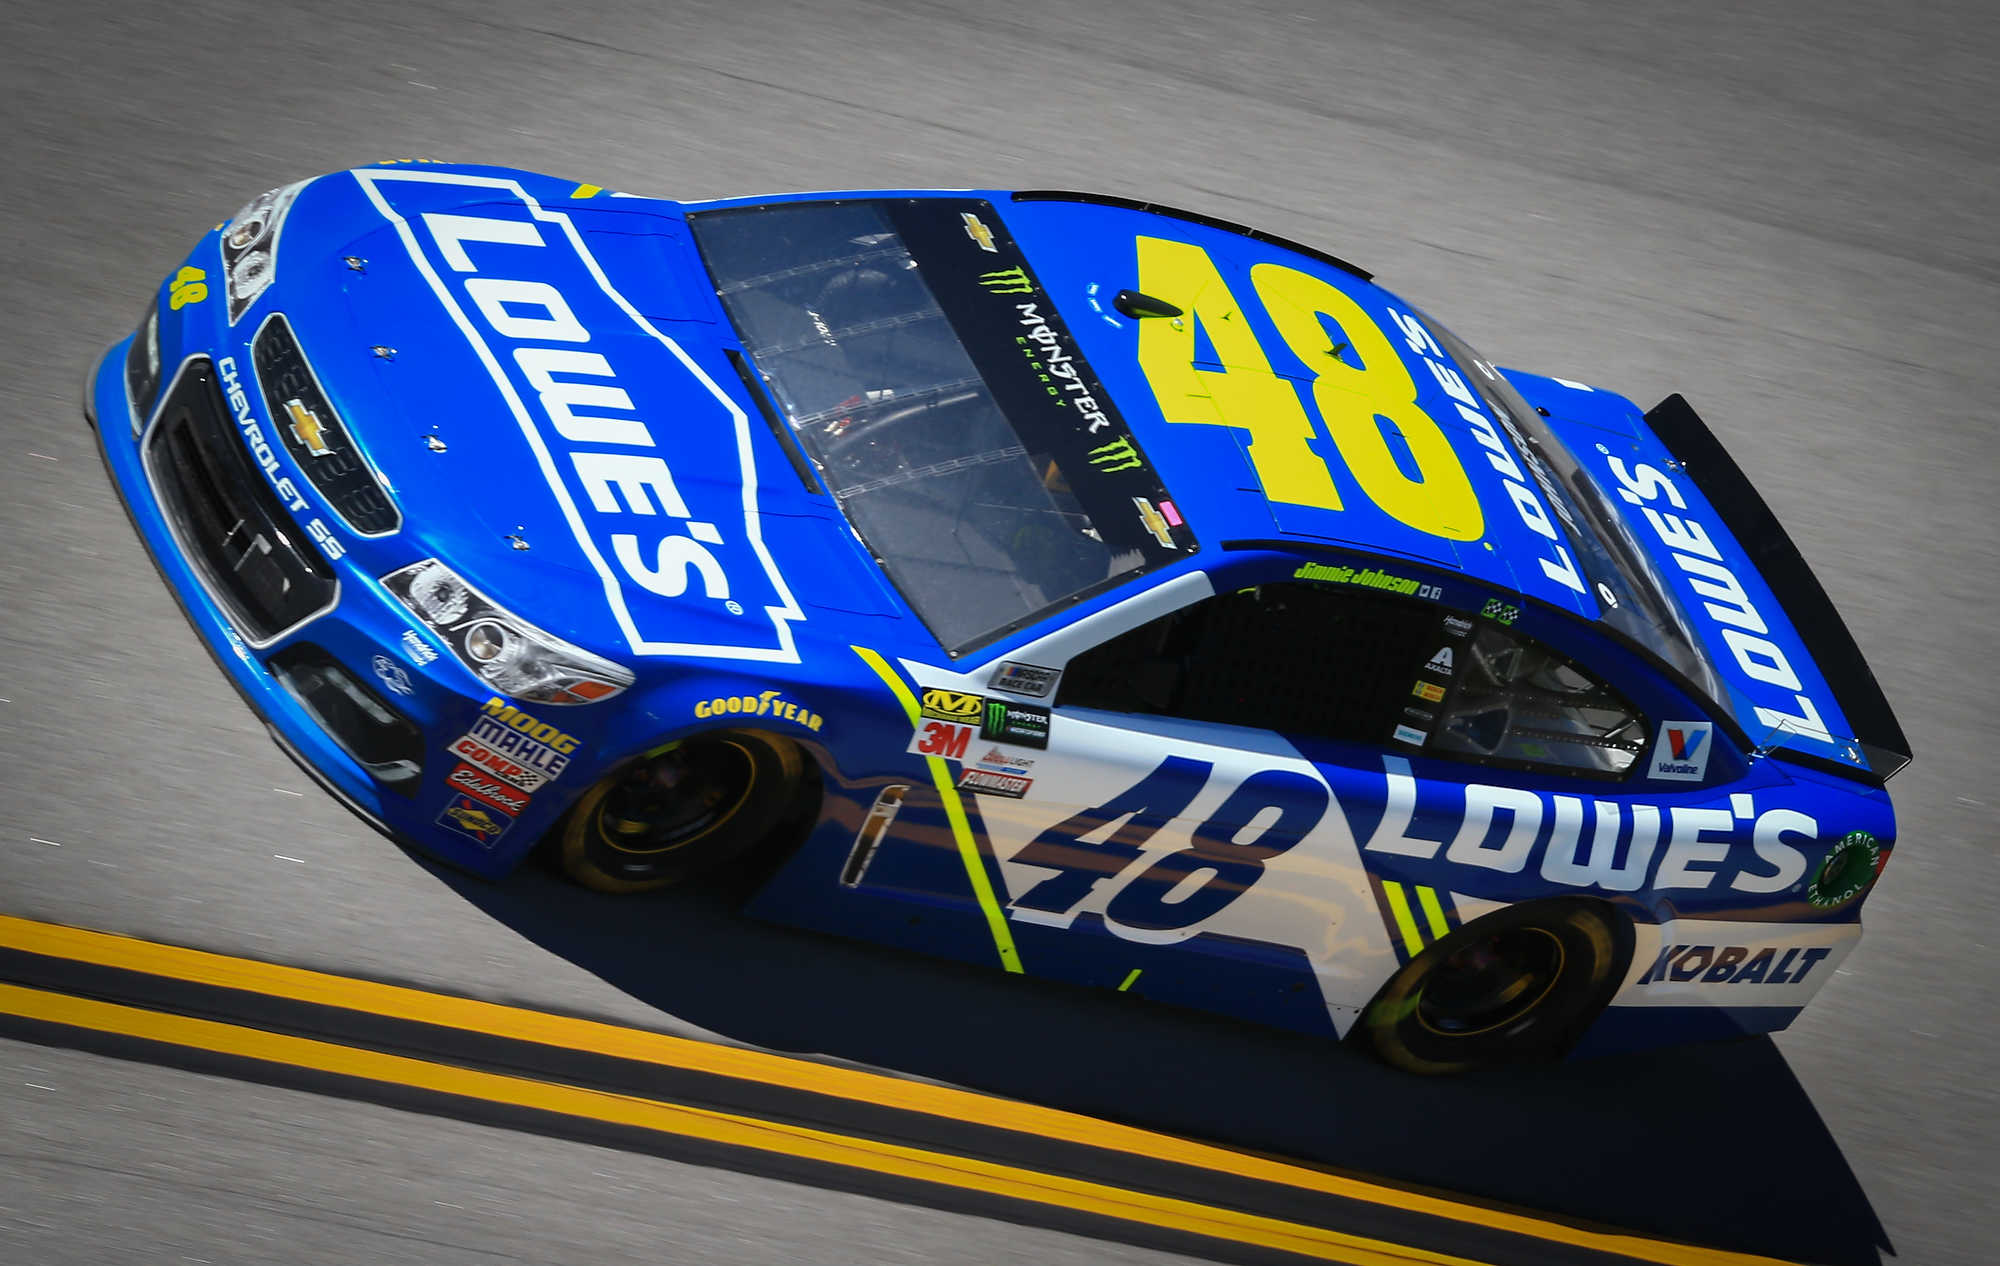 Jimmie Johnson in the #48 Hendrick Chevy